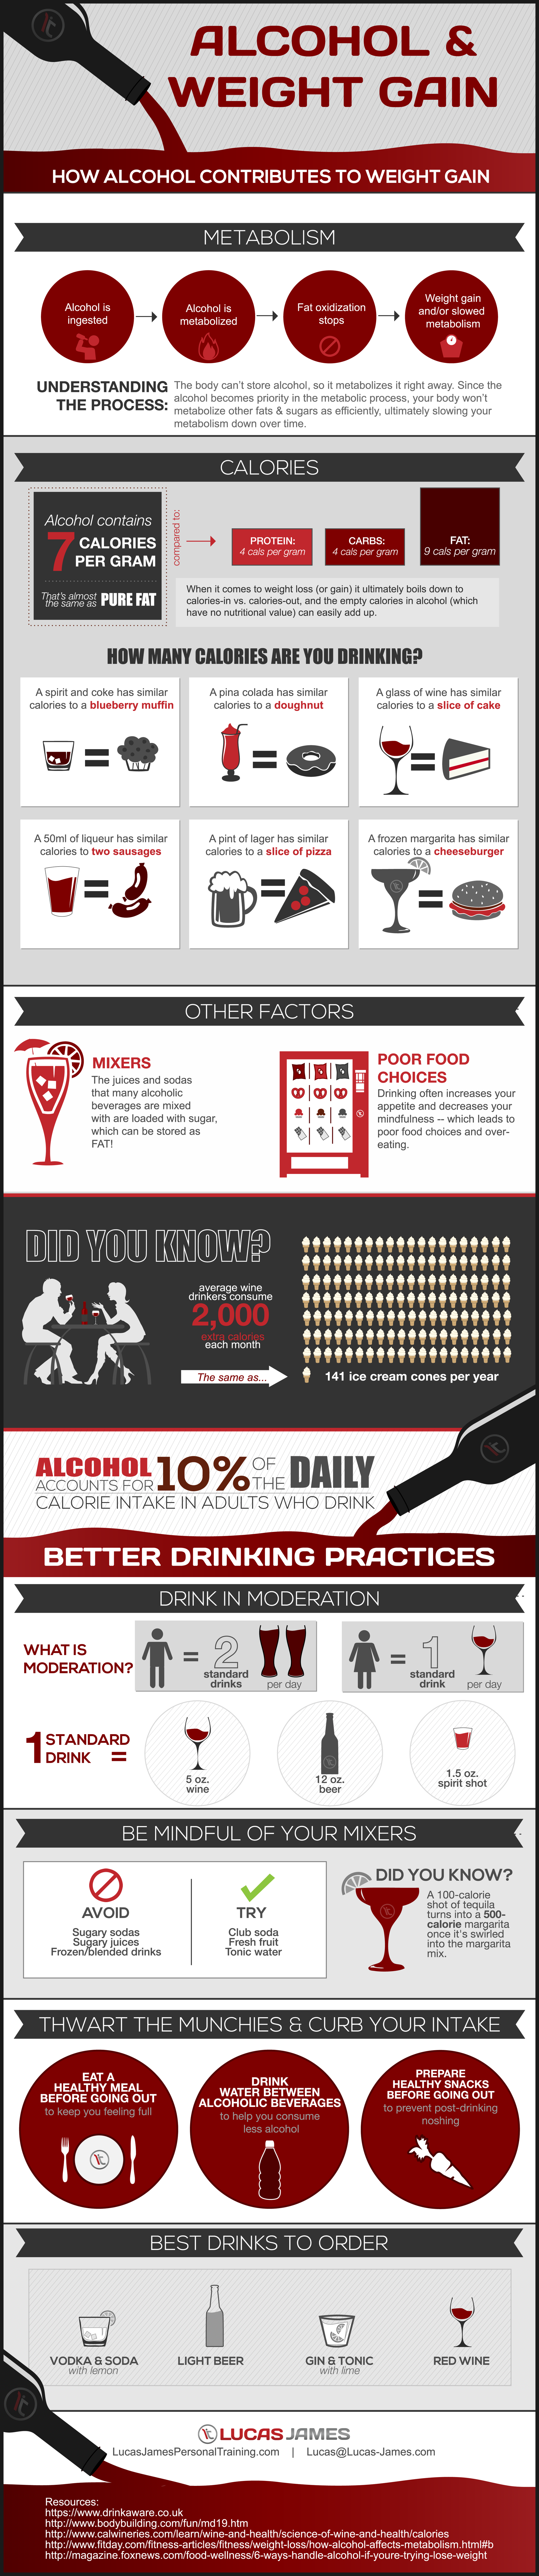 This Infographic Shows How Alcohol Contributes To Weight Gain